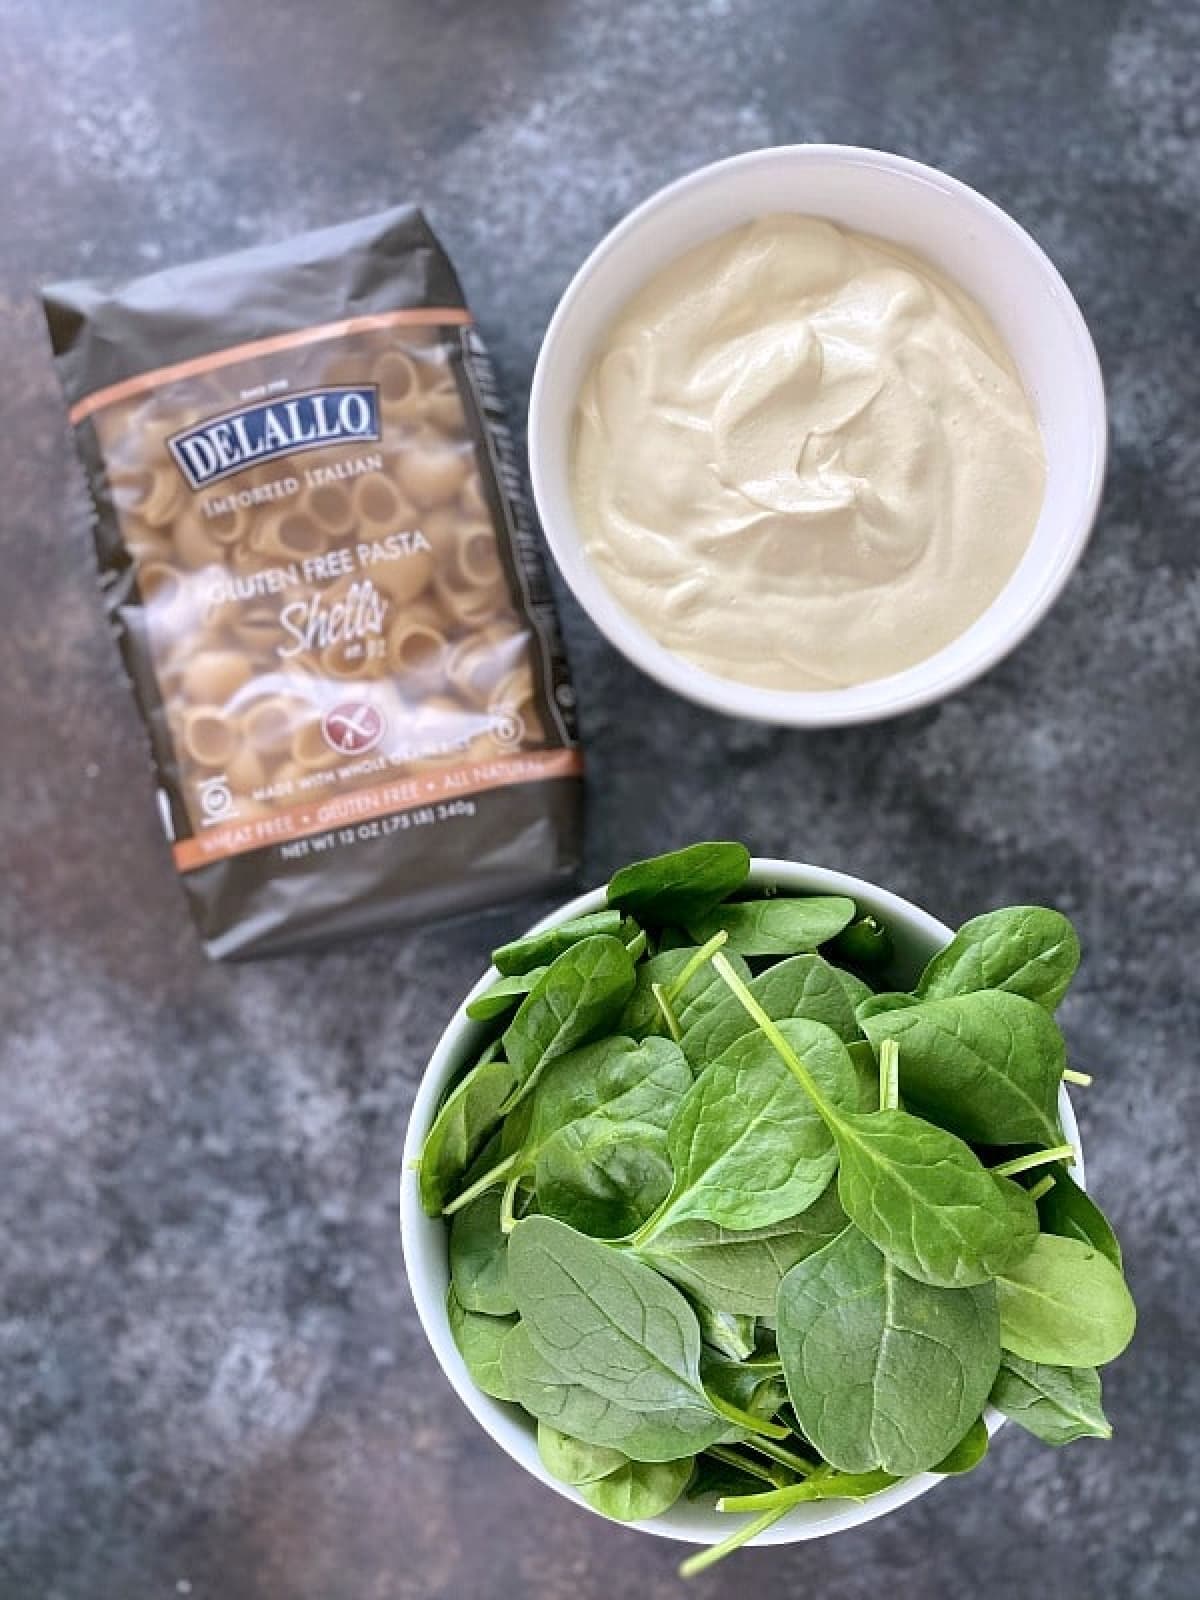 Spinach mac and cheese ingredients: a bowl of fresh spinach, a bowl of cauliflower cheese sauce, a package of gluten free pasta